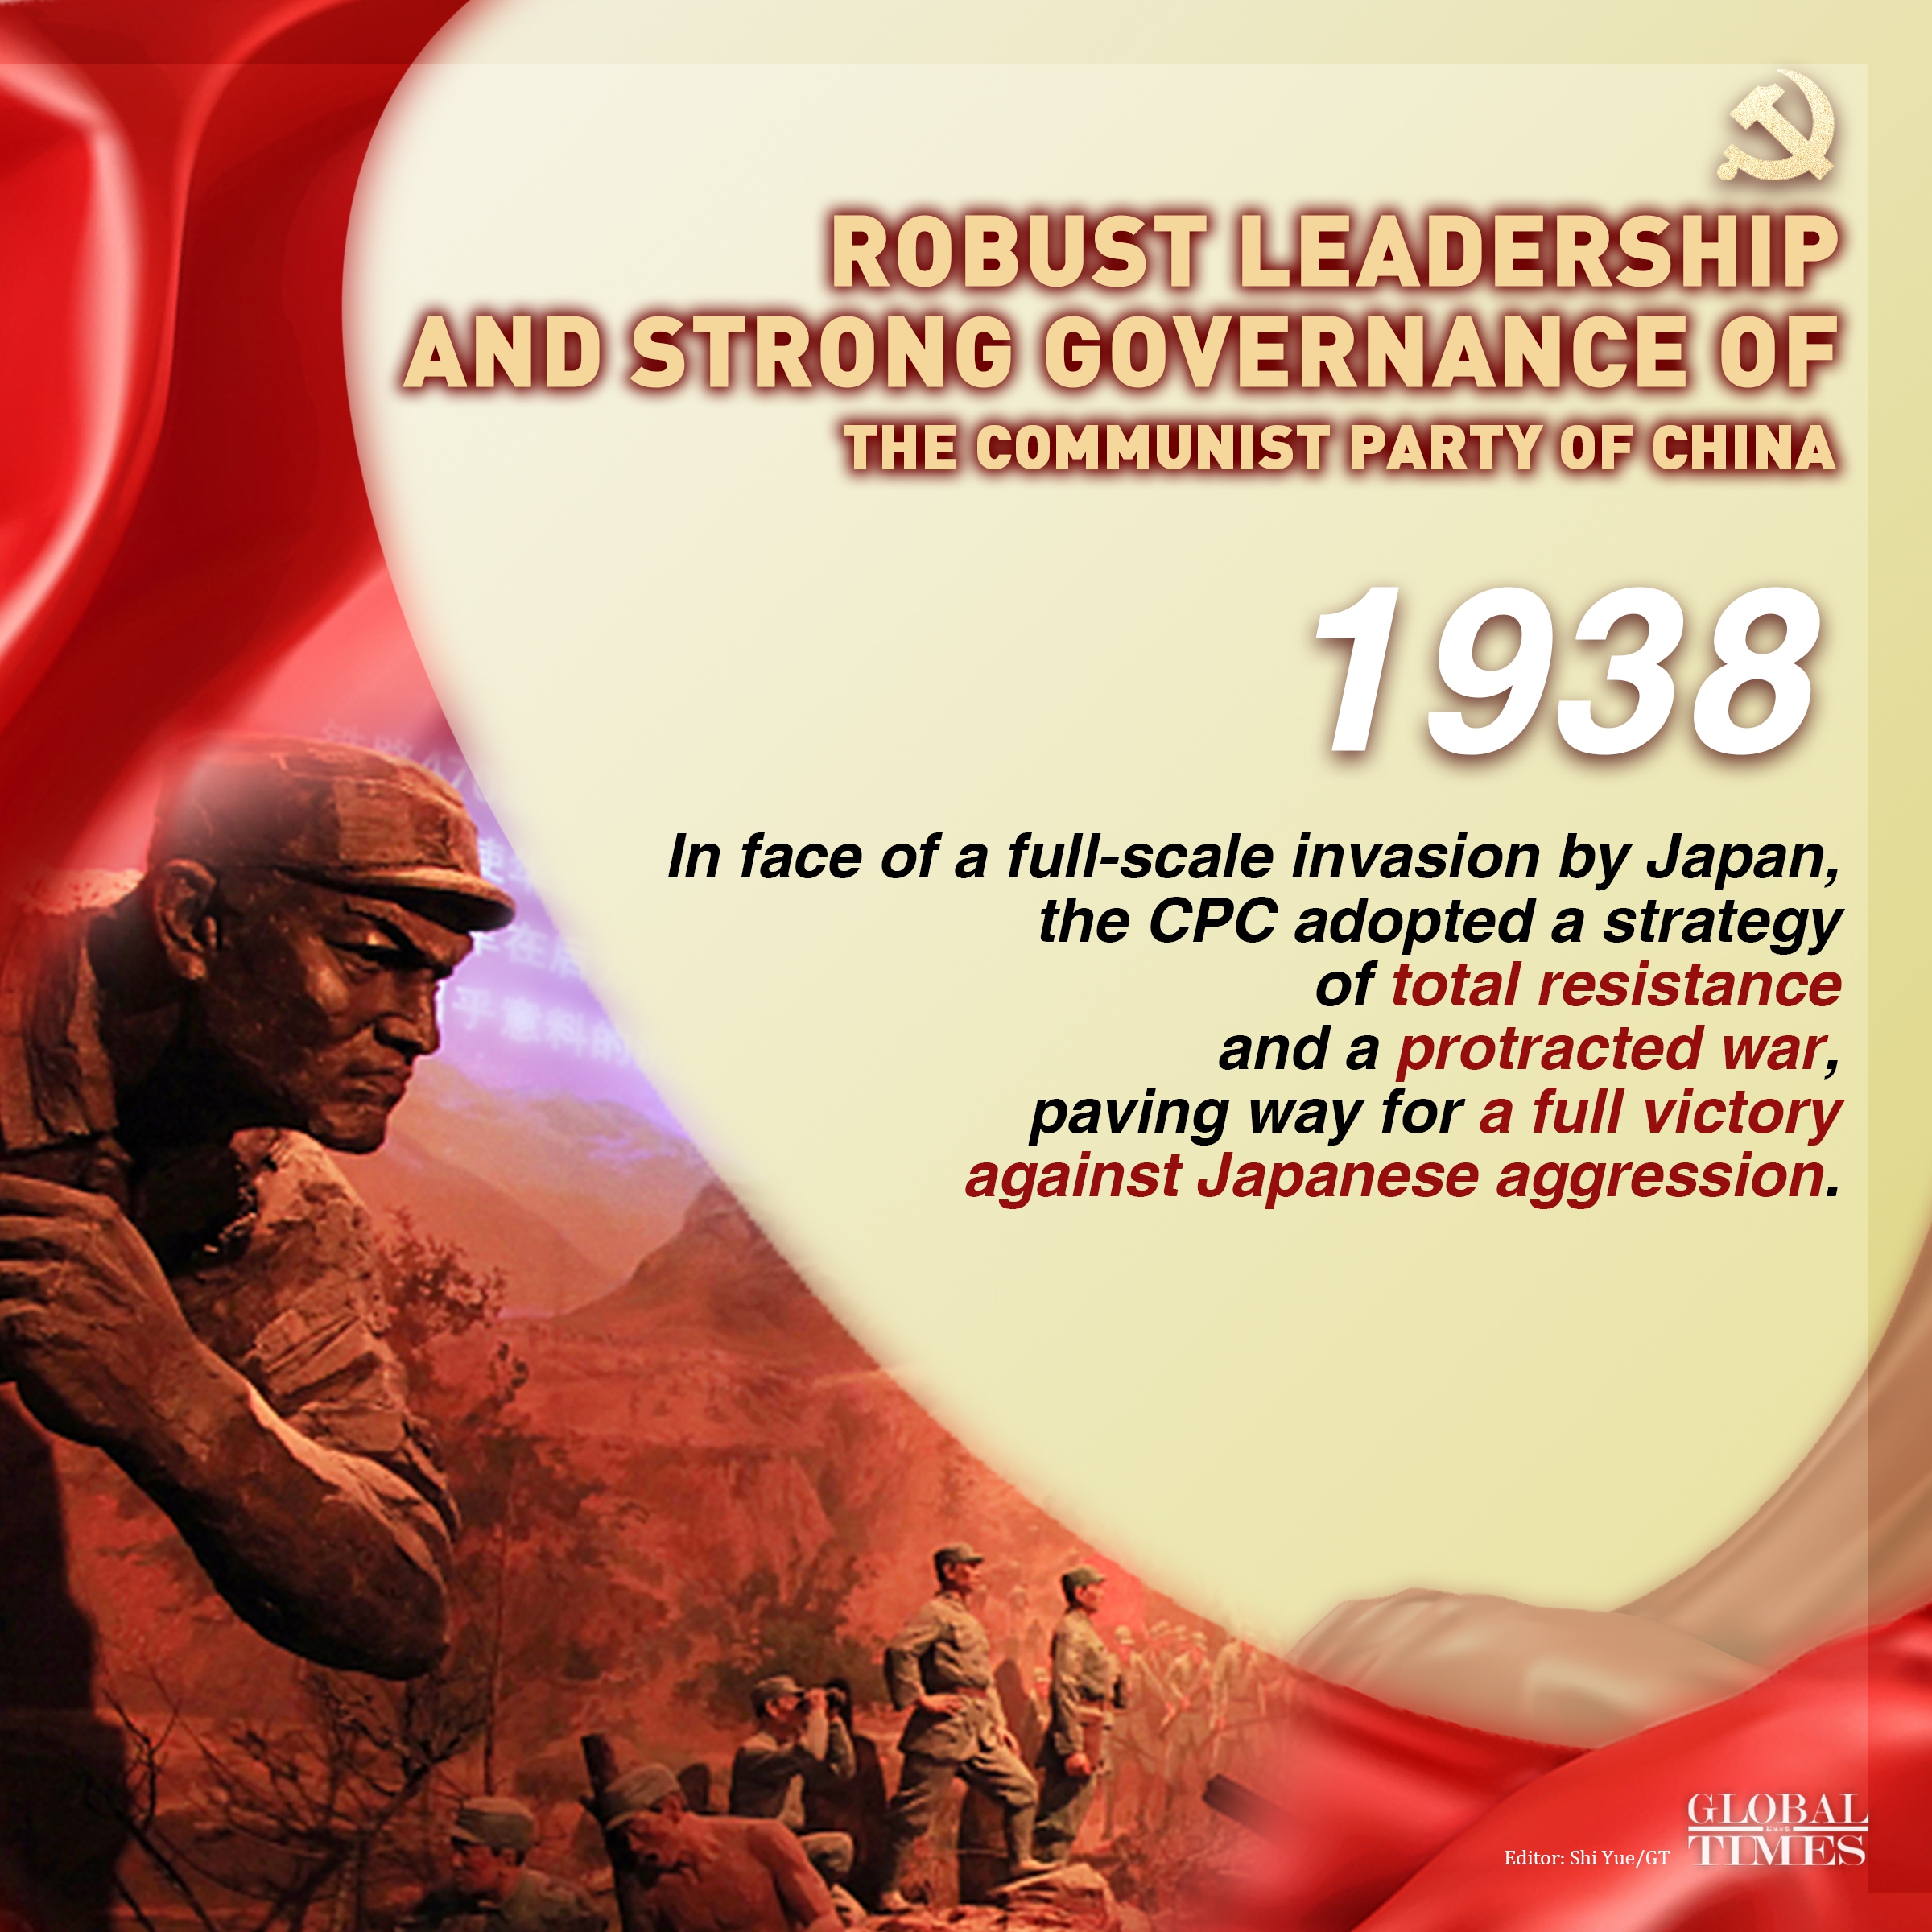 In face of a full-scale invasion by Japan, the CPC adopted a strategy of total resistance and a protracted war, paving way for full victory against Japanese aggression. Graphic: Xu Zihe/GT